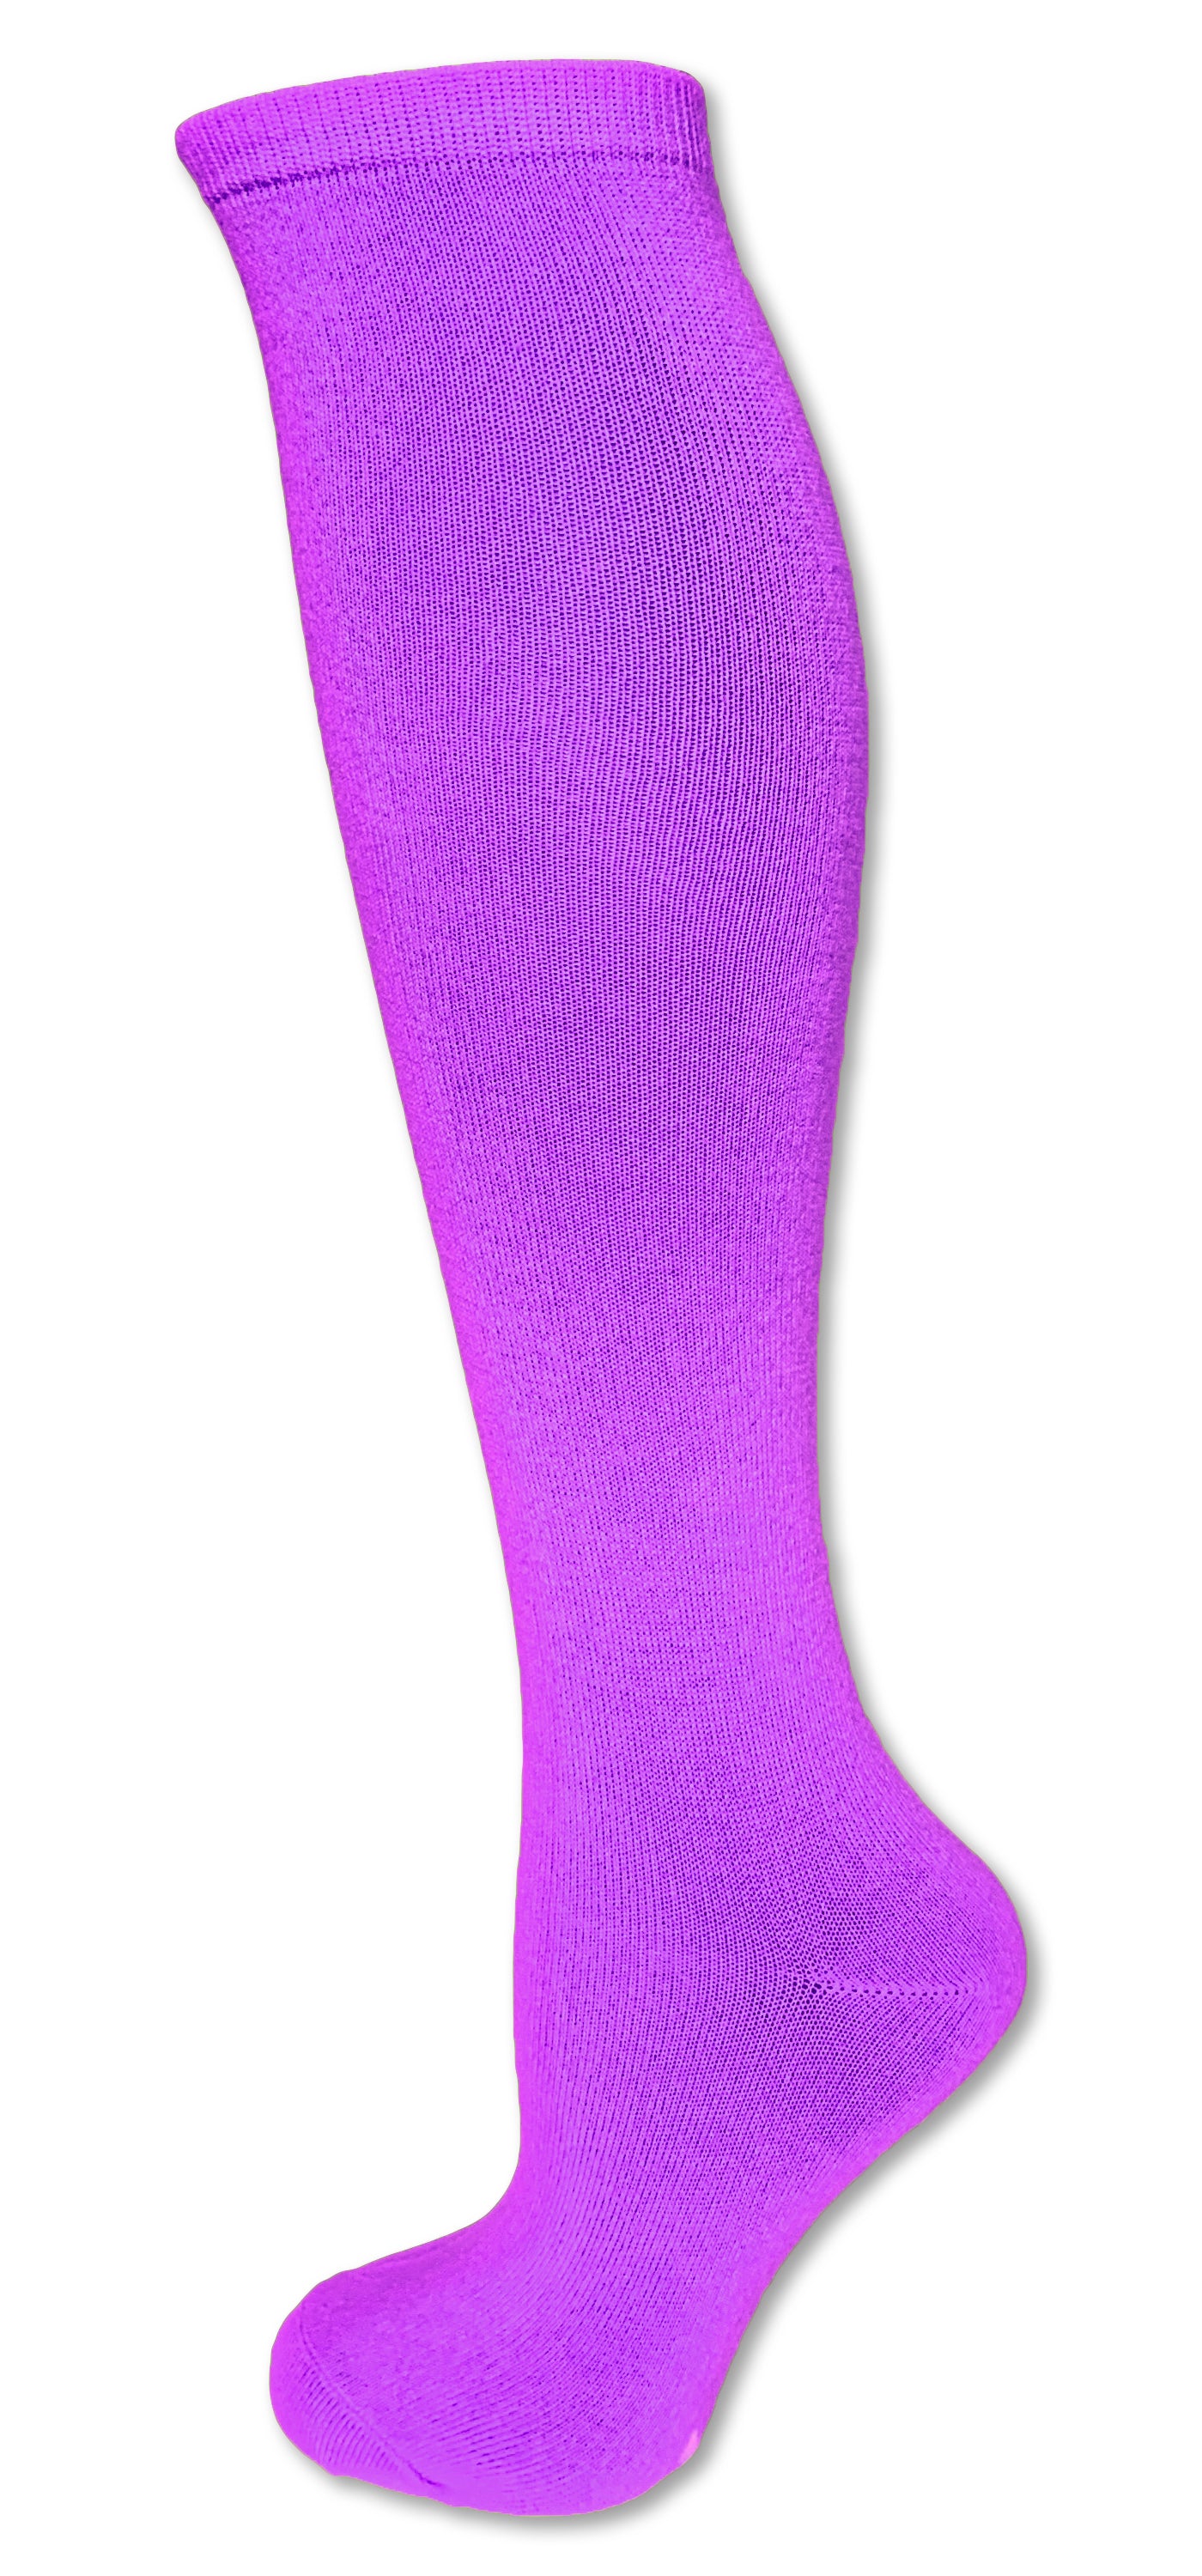 Solid Color Knee High Tube Socks with No Stripes